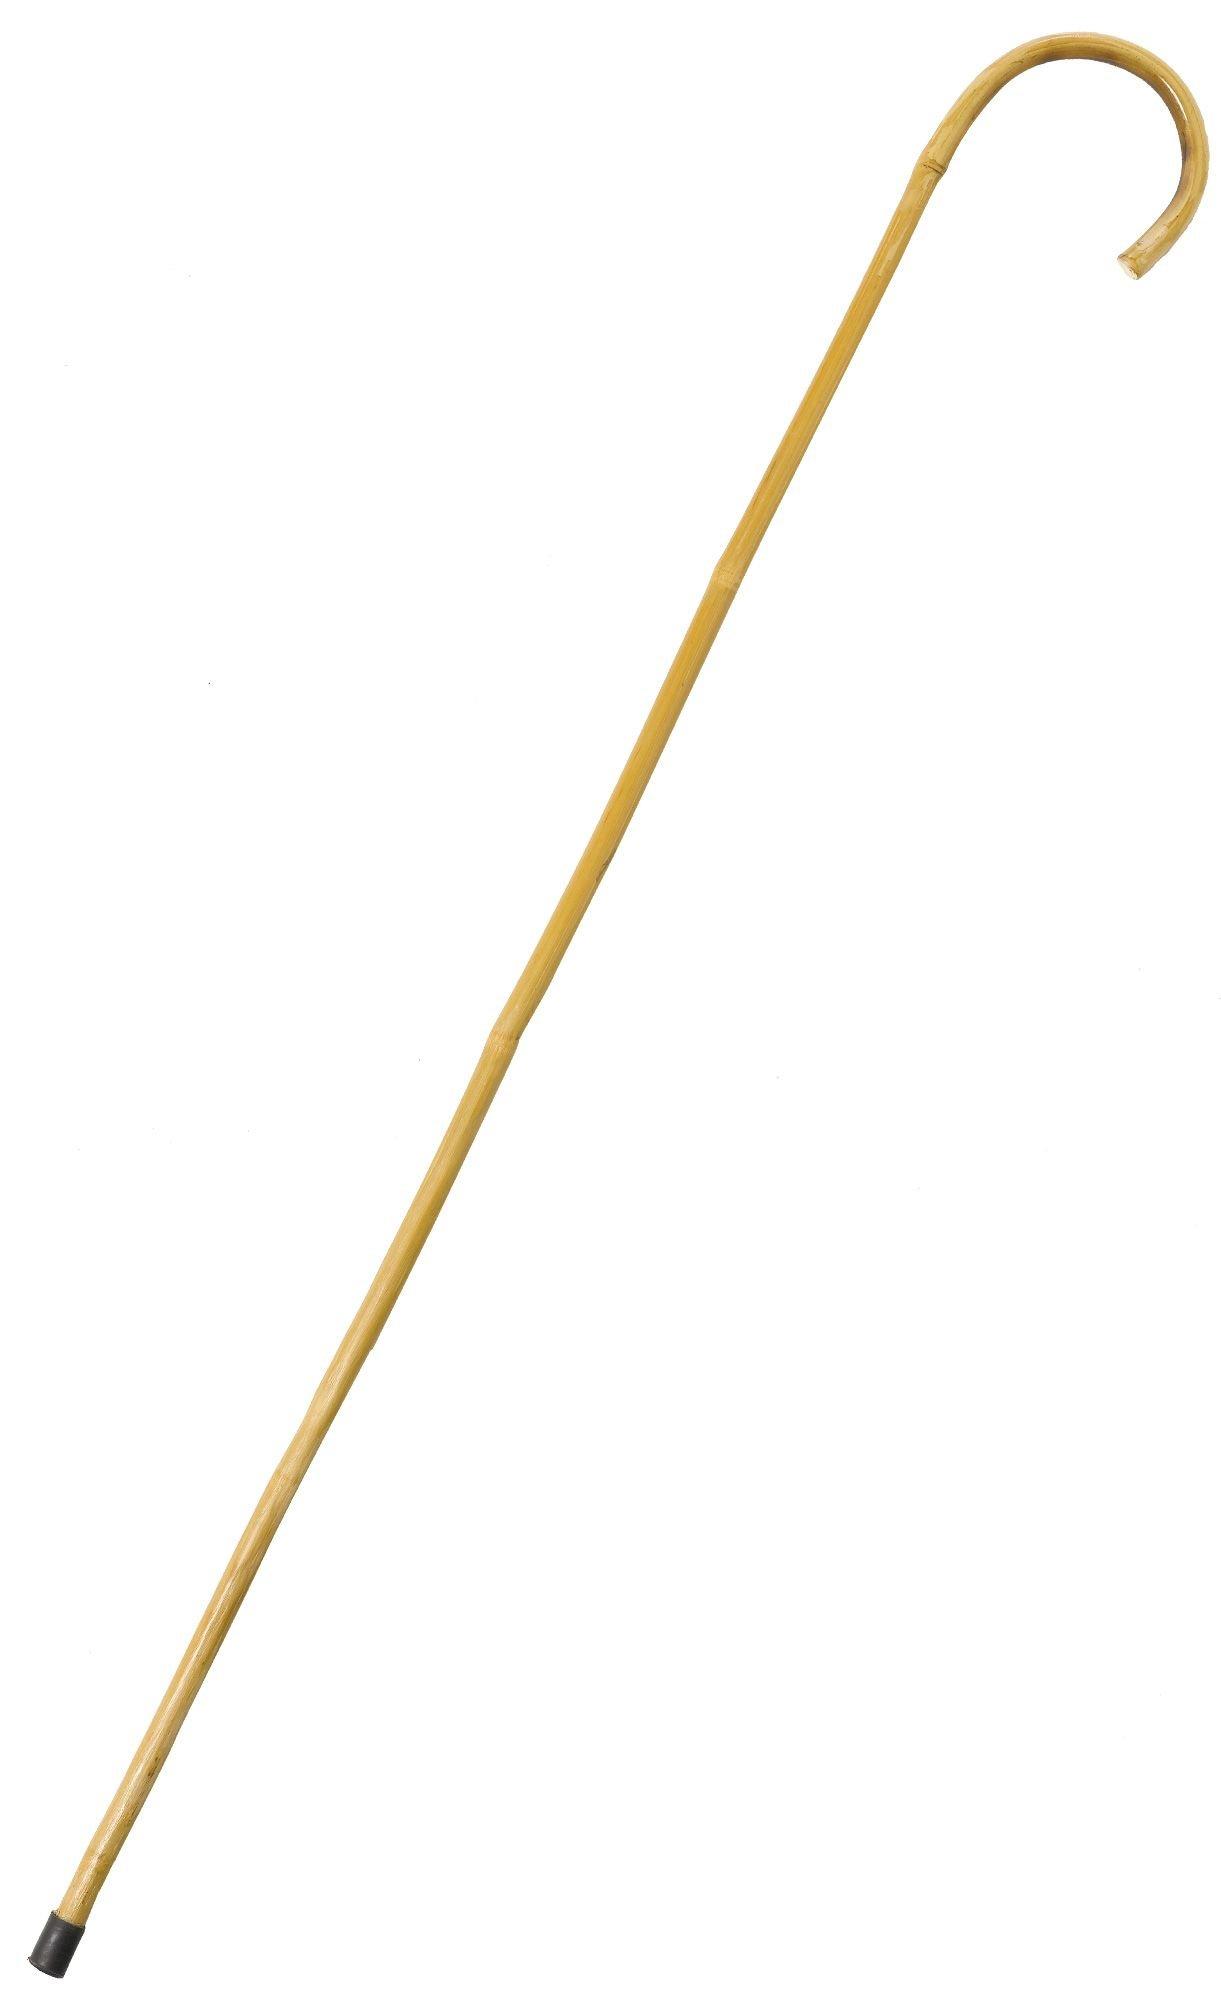 Bamboo Cane 37in